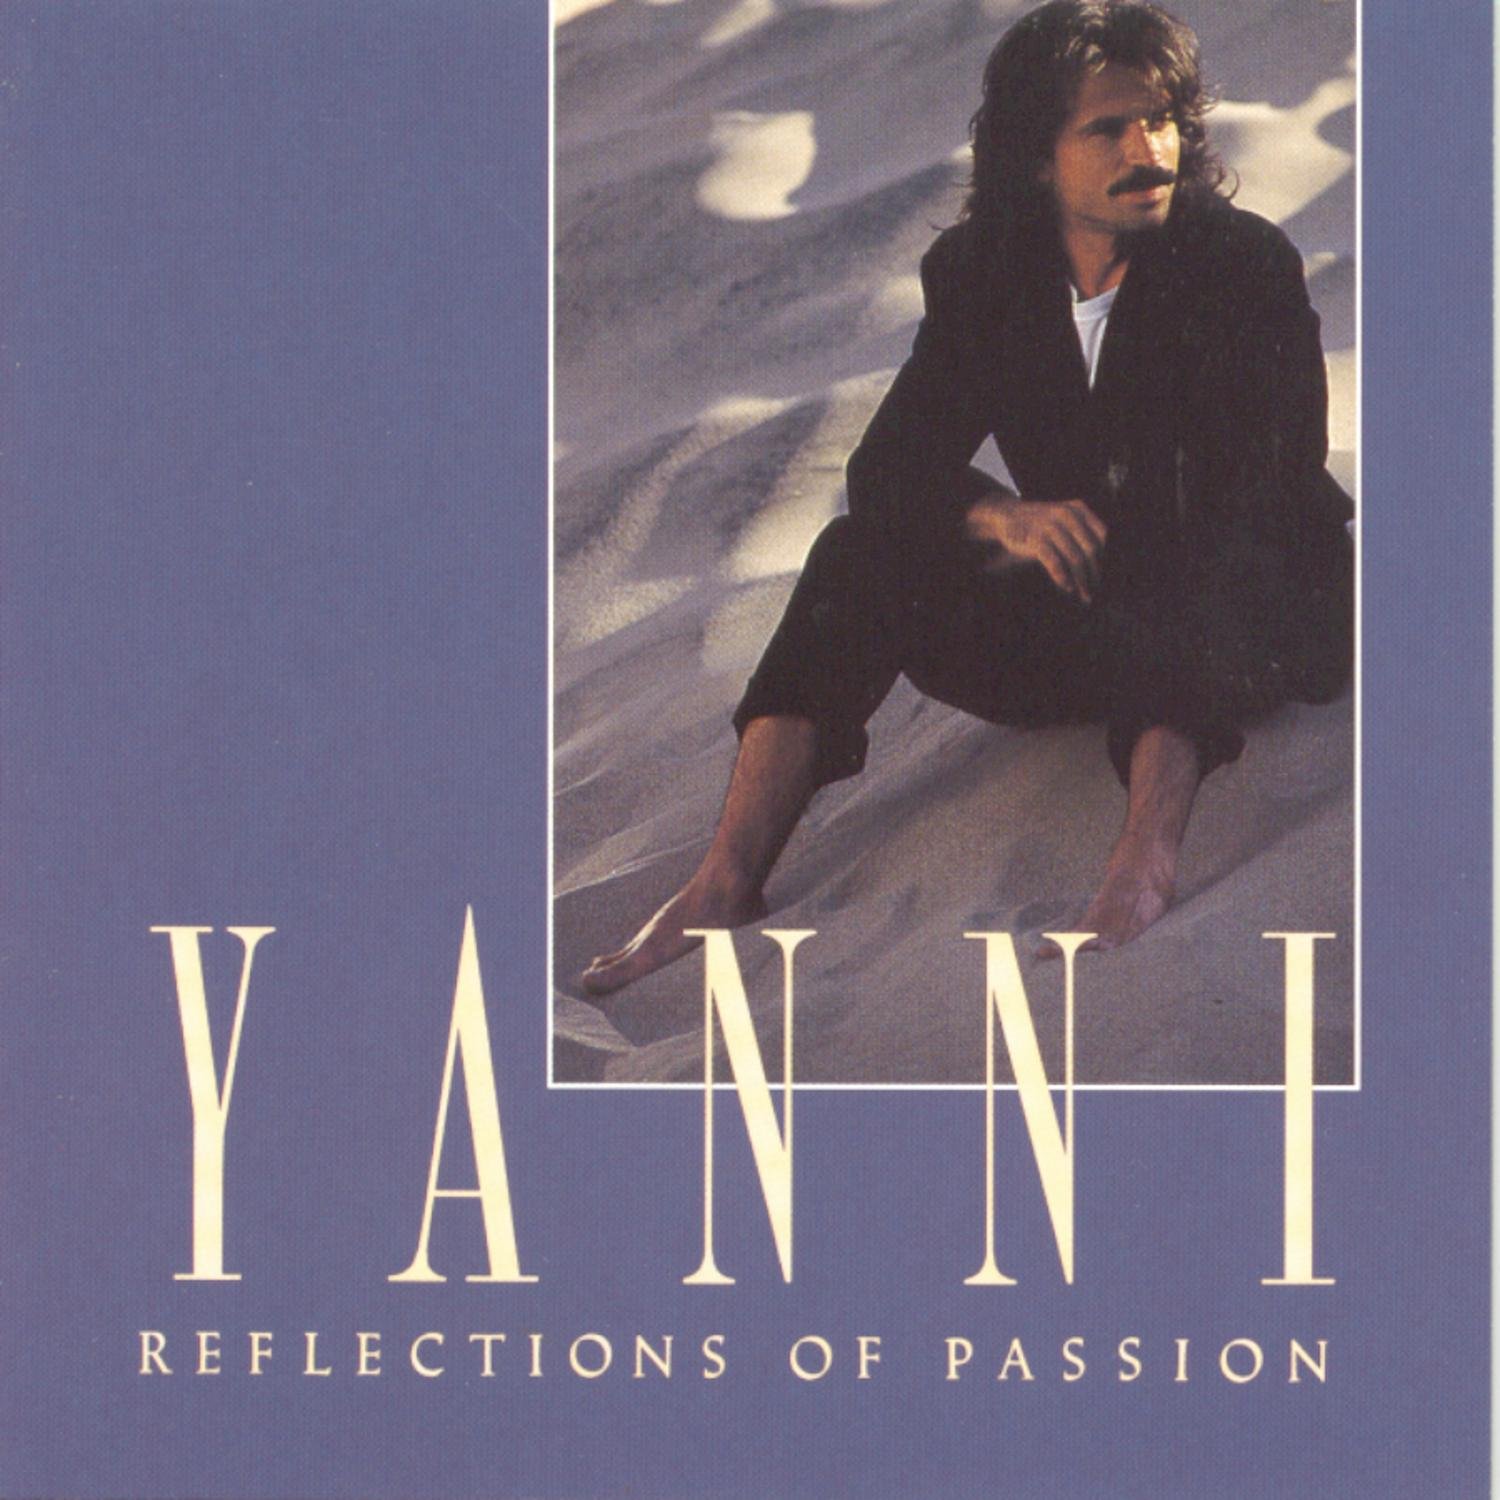 Yanni-Reflections Of Passion-CD-FLAC-1990-FLACME